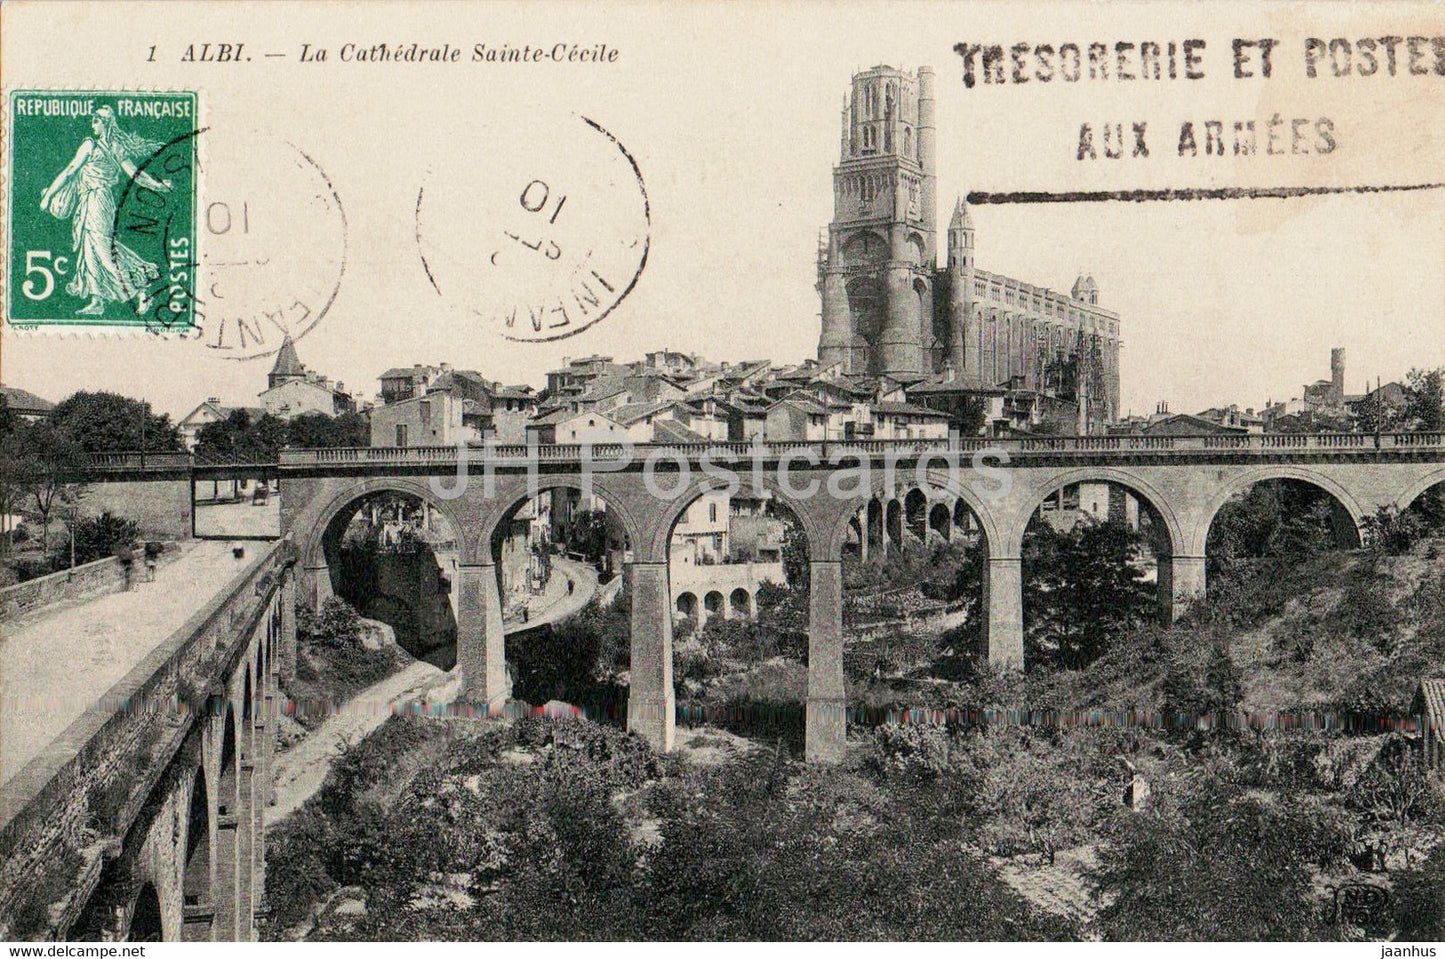 Albi - La Cathedrale Sainte Cecile - cathedral - 1 - old postcard - 1910 - France - used - JH Postcards